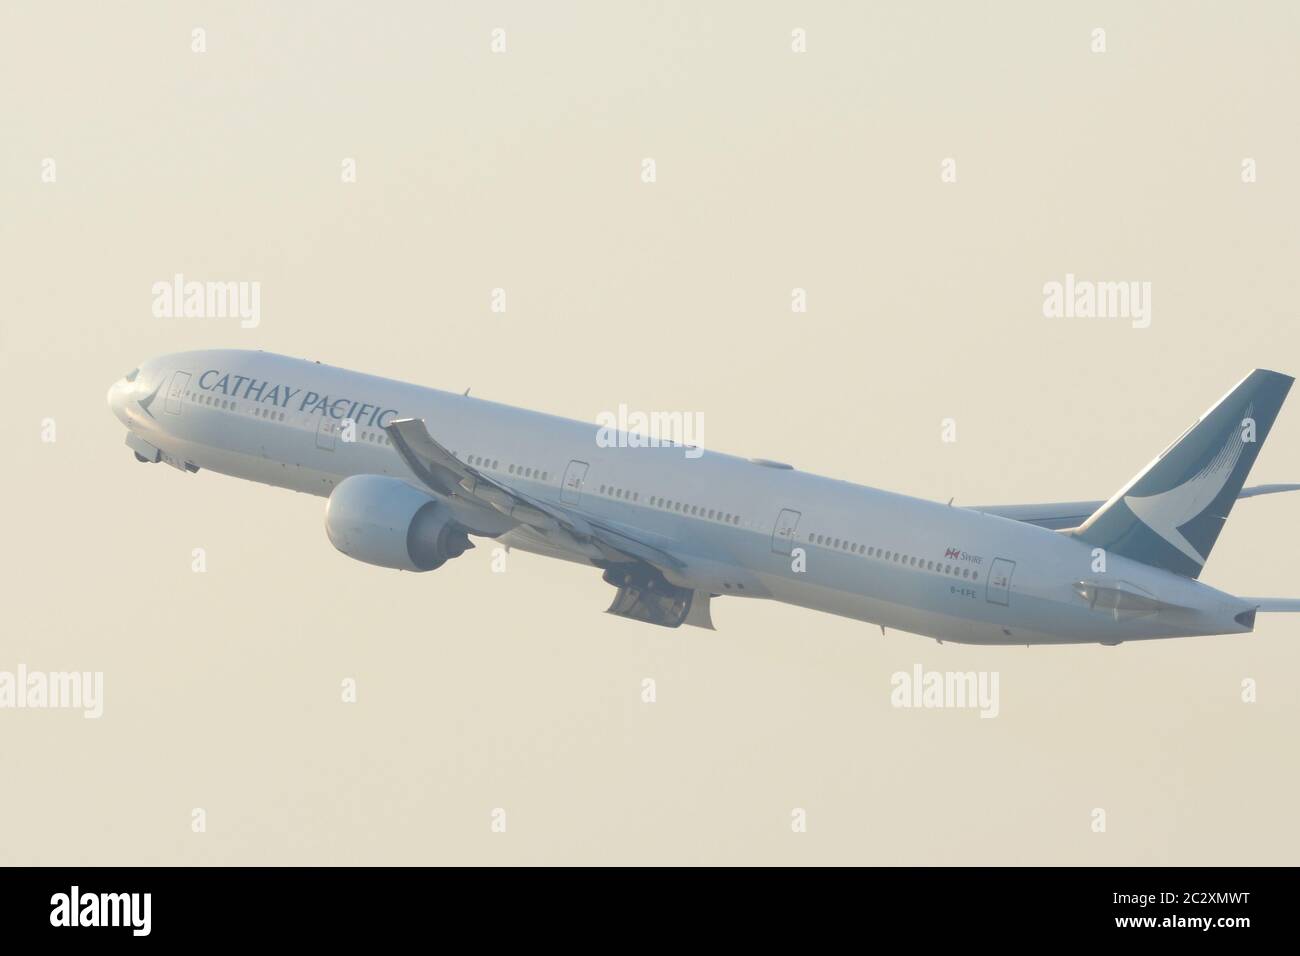 Cathay Pacific departure from Hong Kong Stock Photo